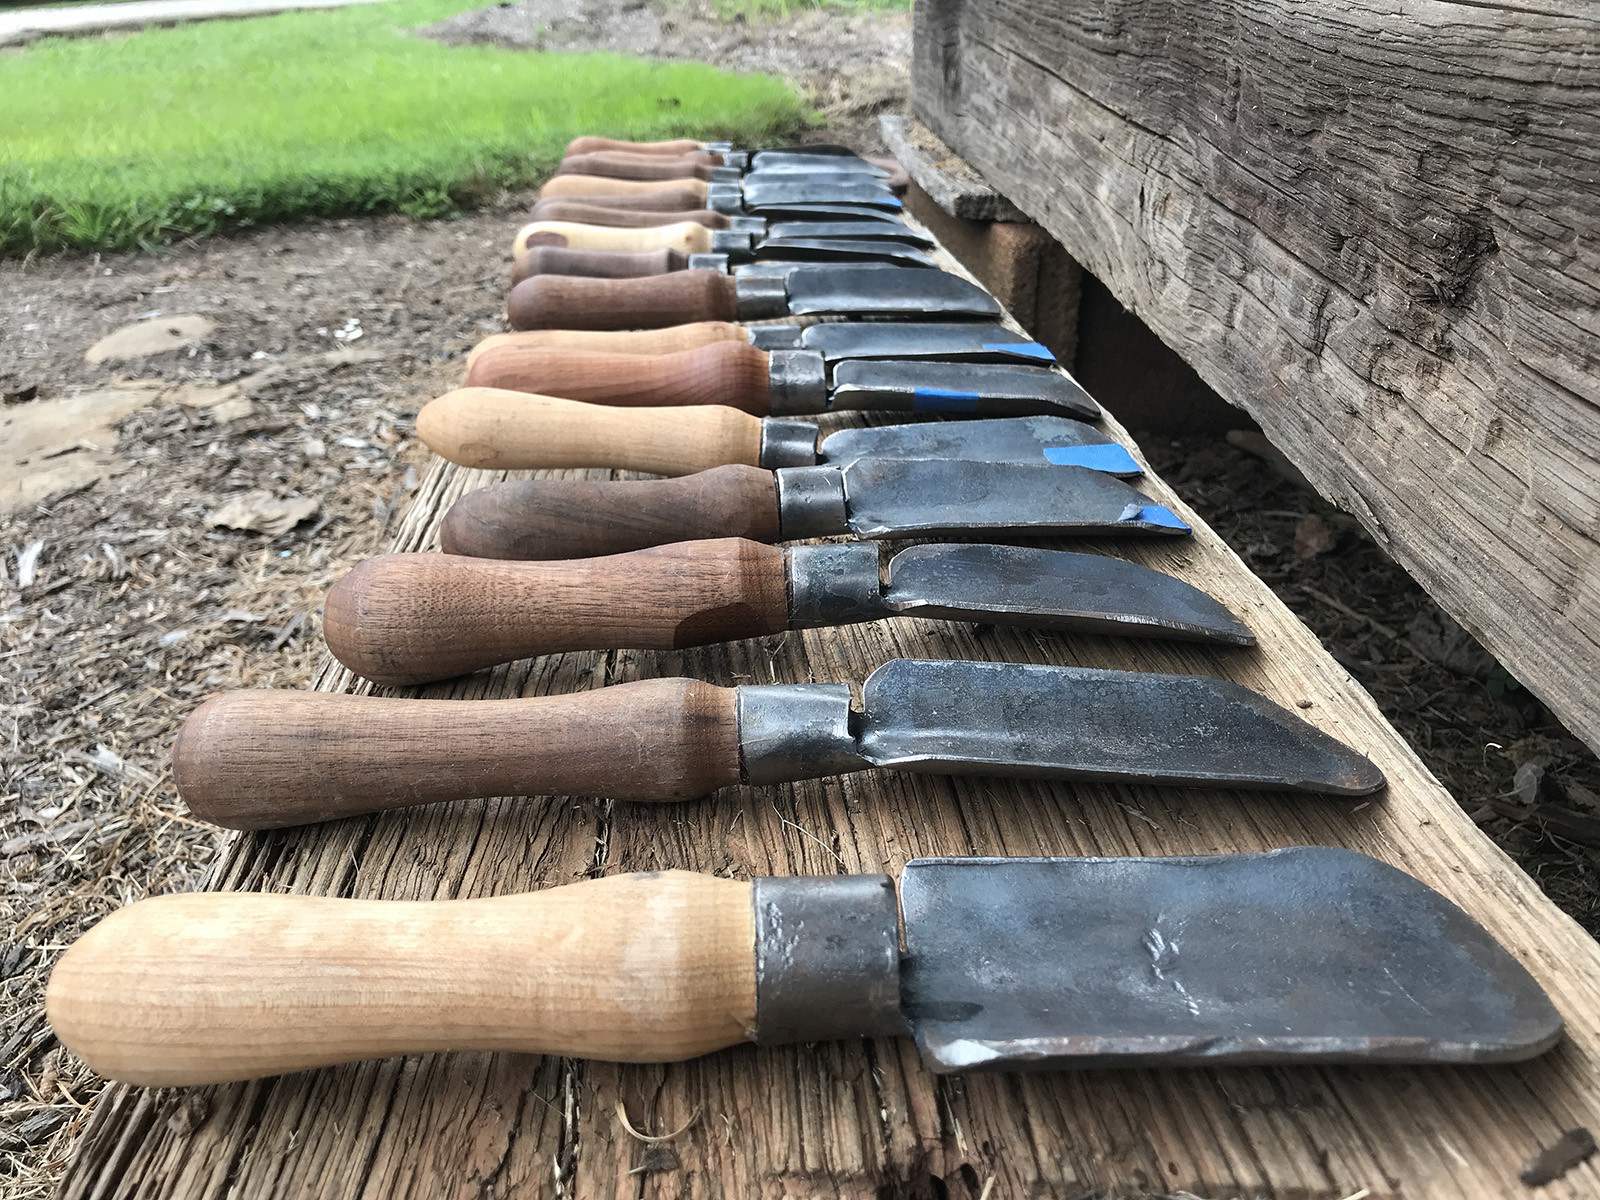 Garden tools made from guns, much like the prophecies of turning swords into plowshares. Photo courtesy of Red Letter Christians